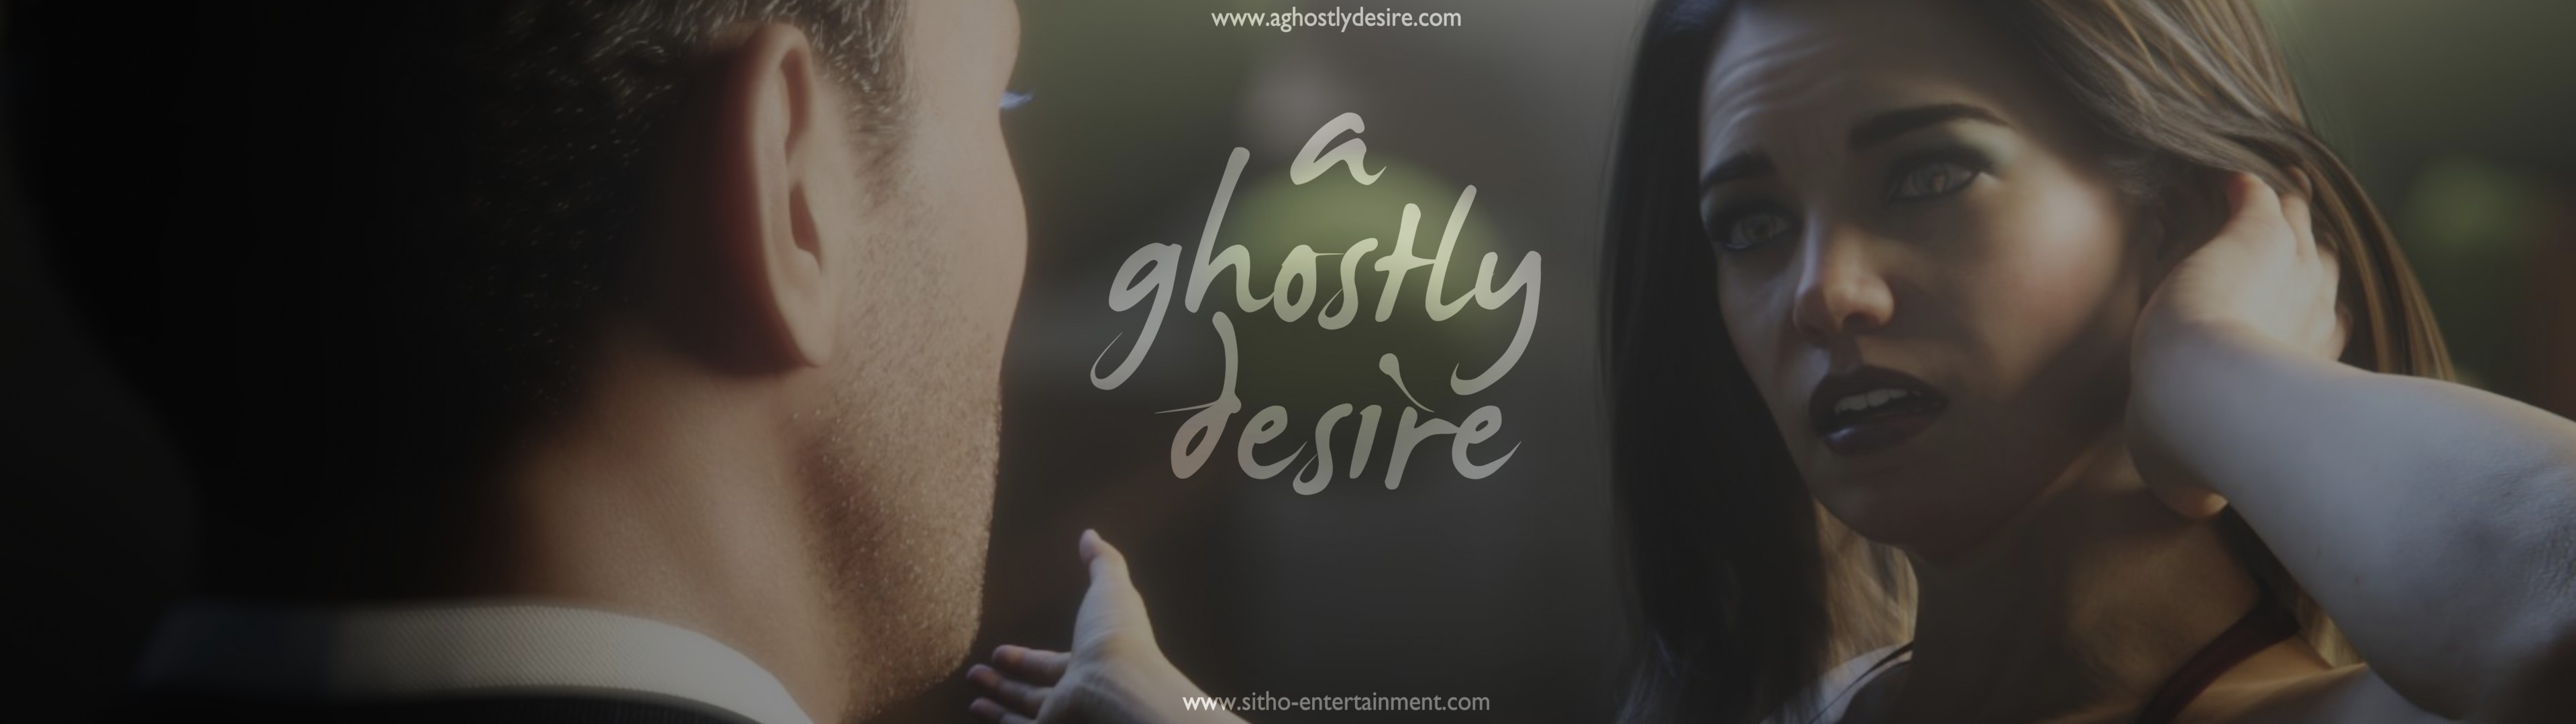 A Ghostly Desire poster